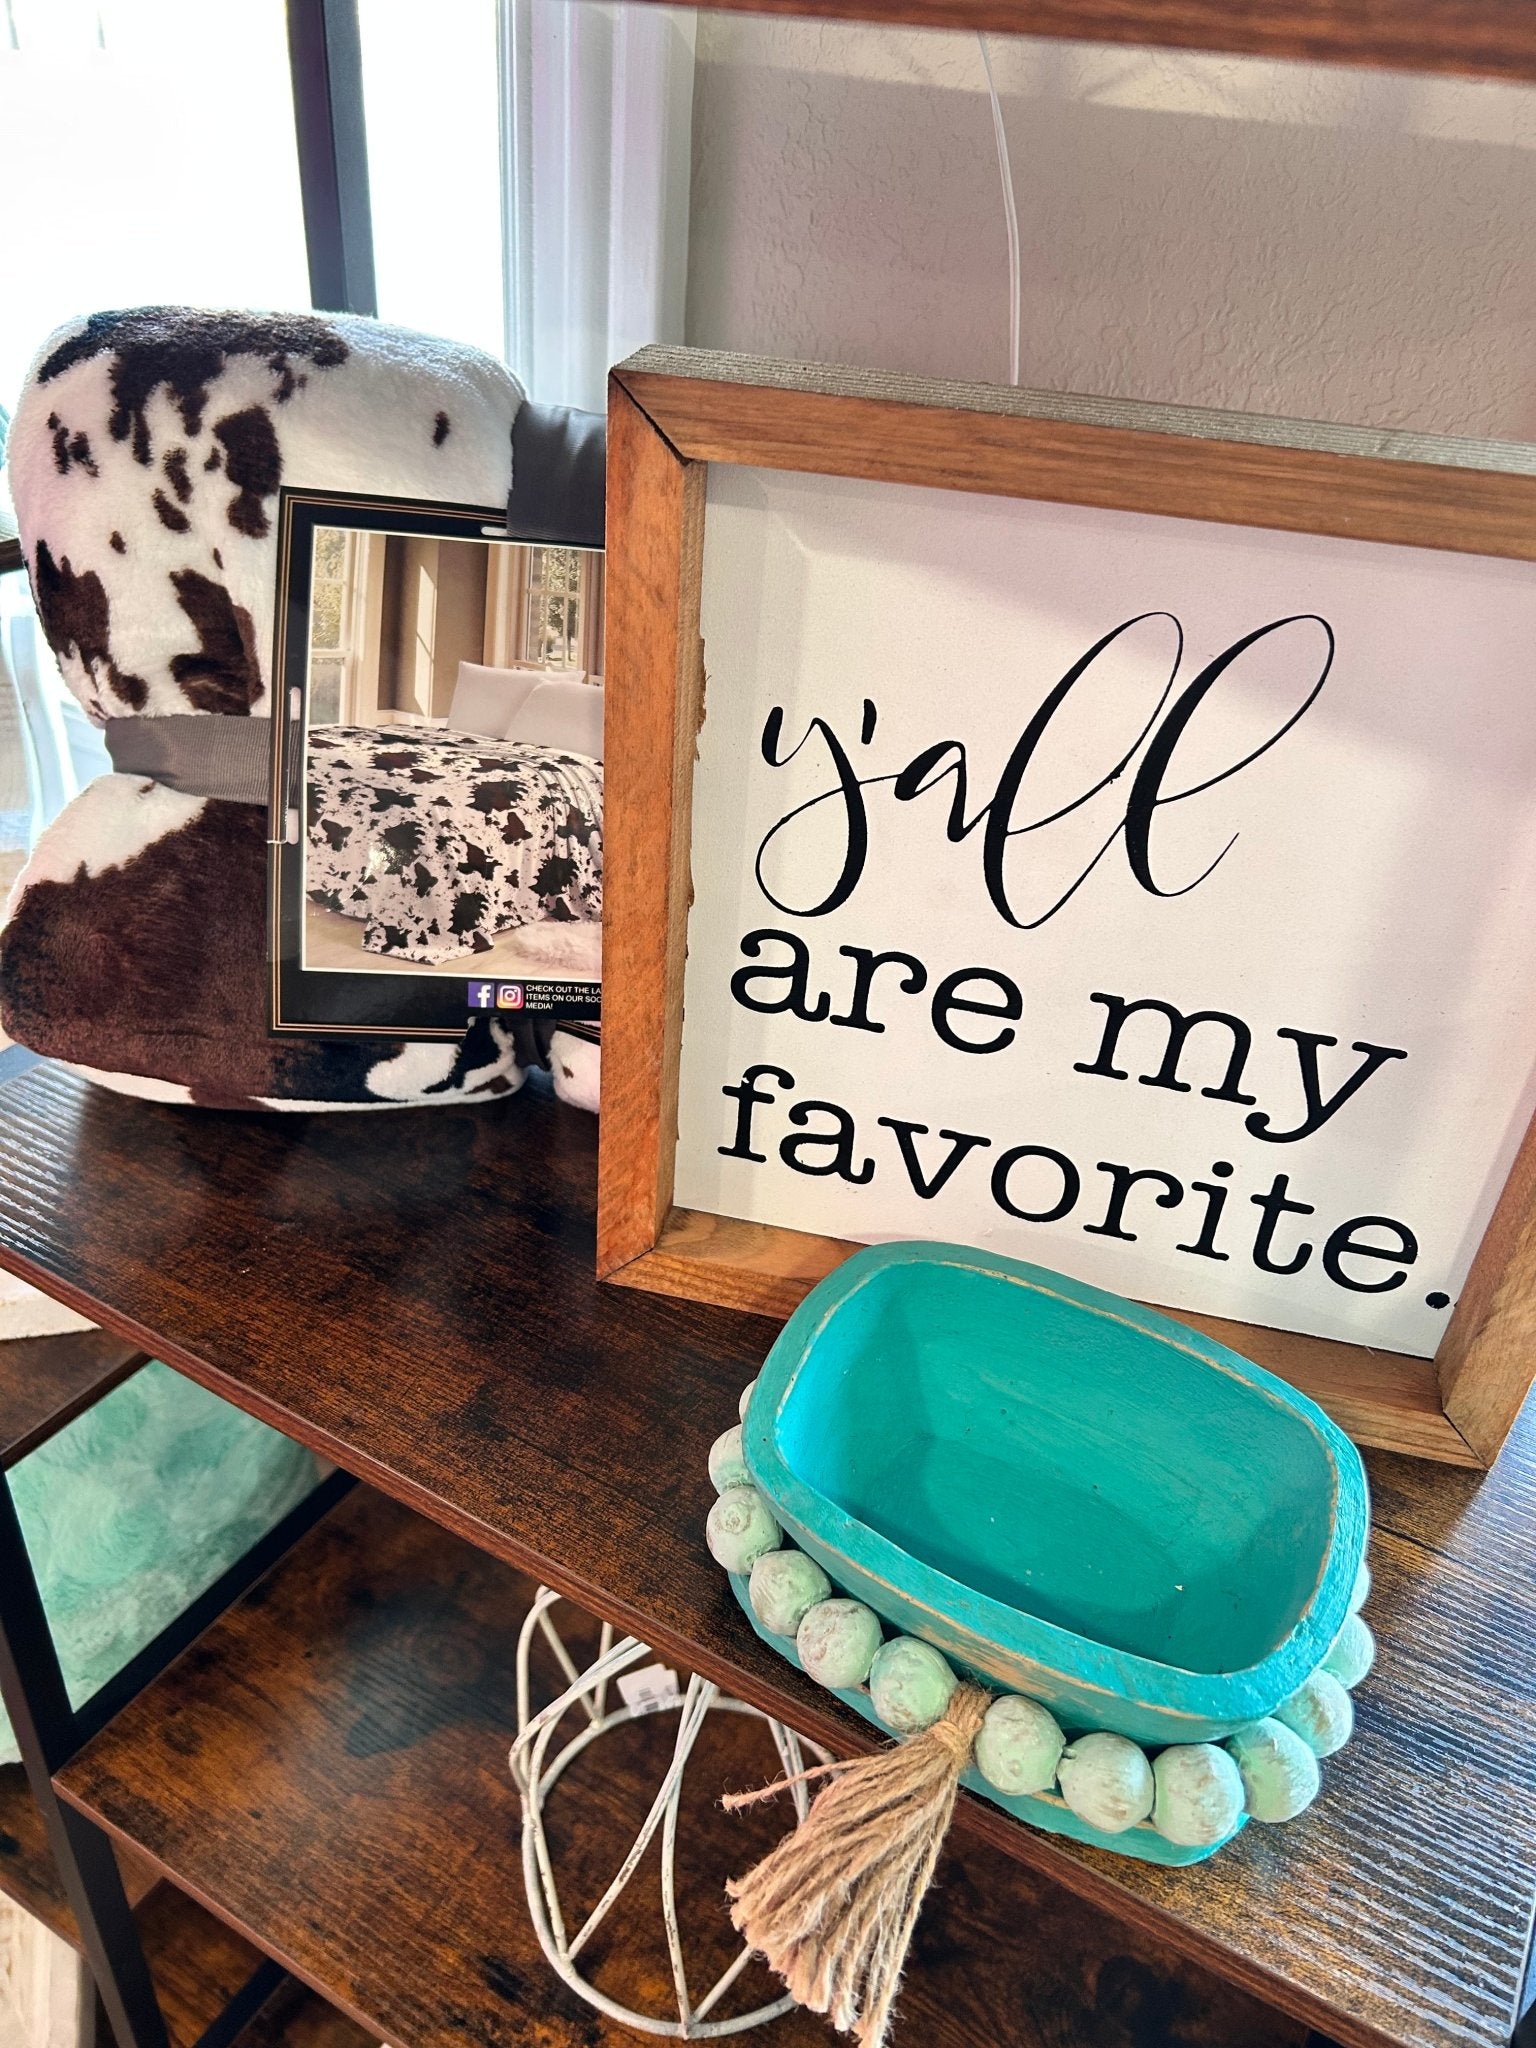 y'all are my favorite - Hey Heifer Boutique